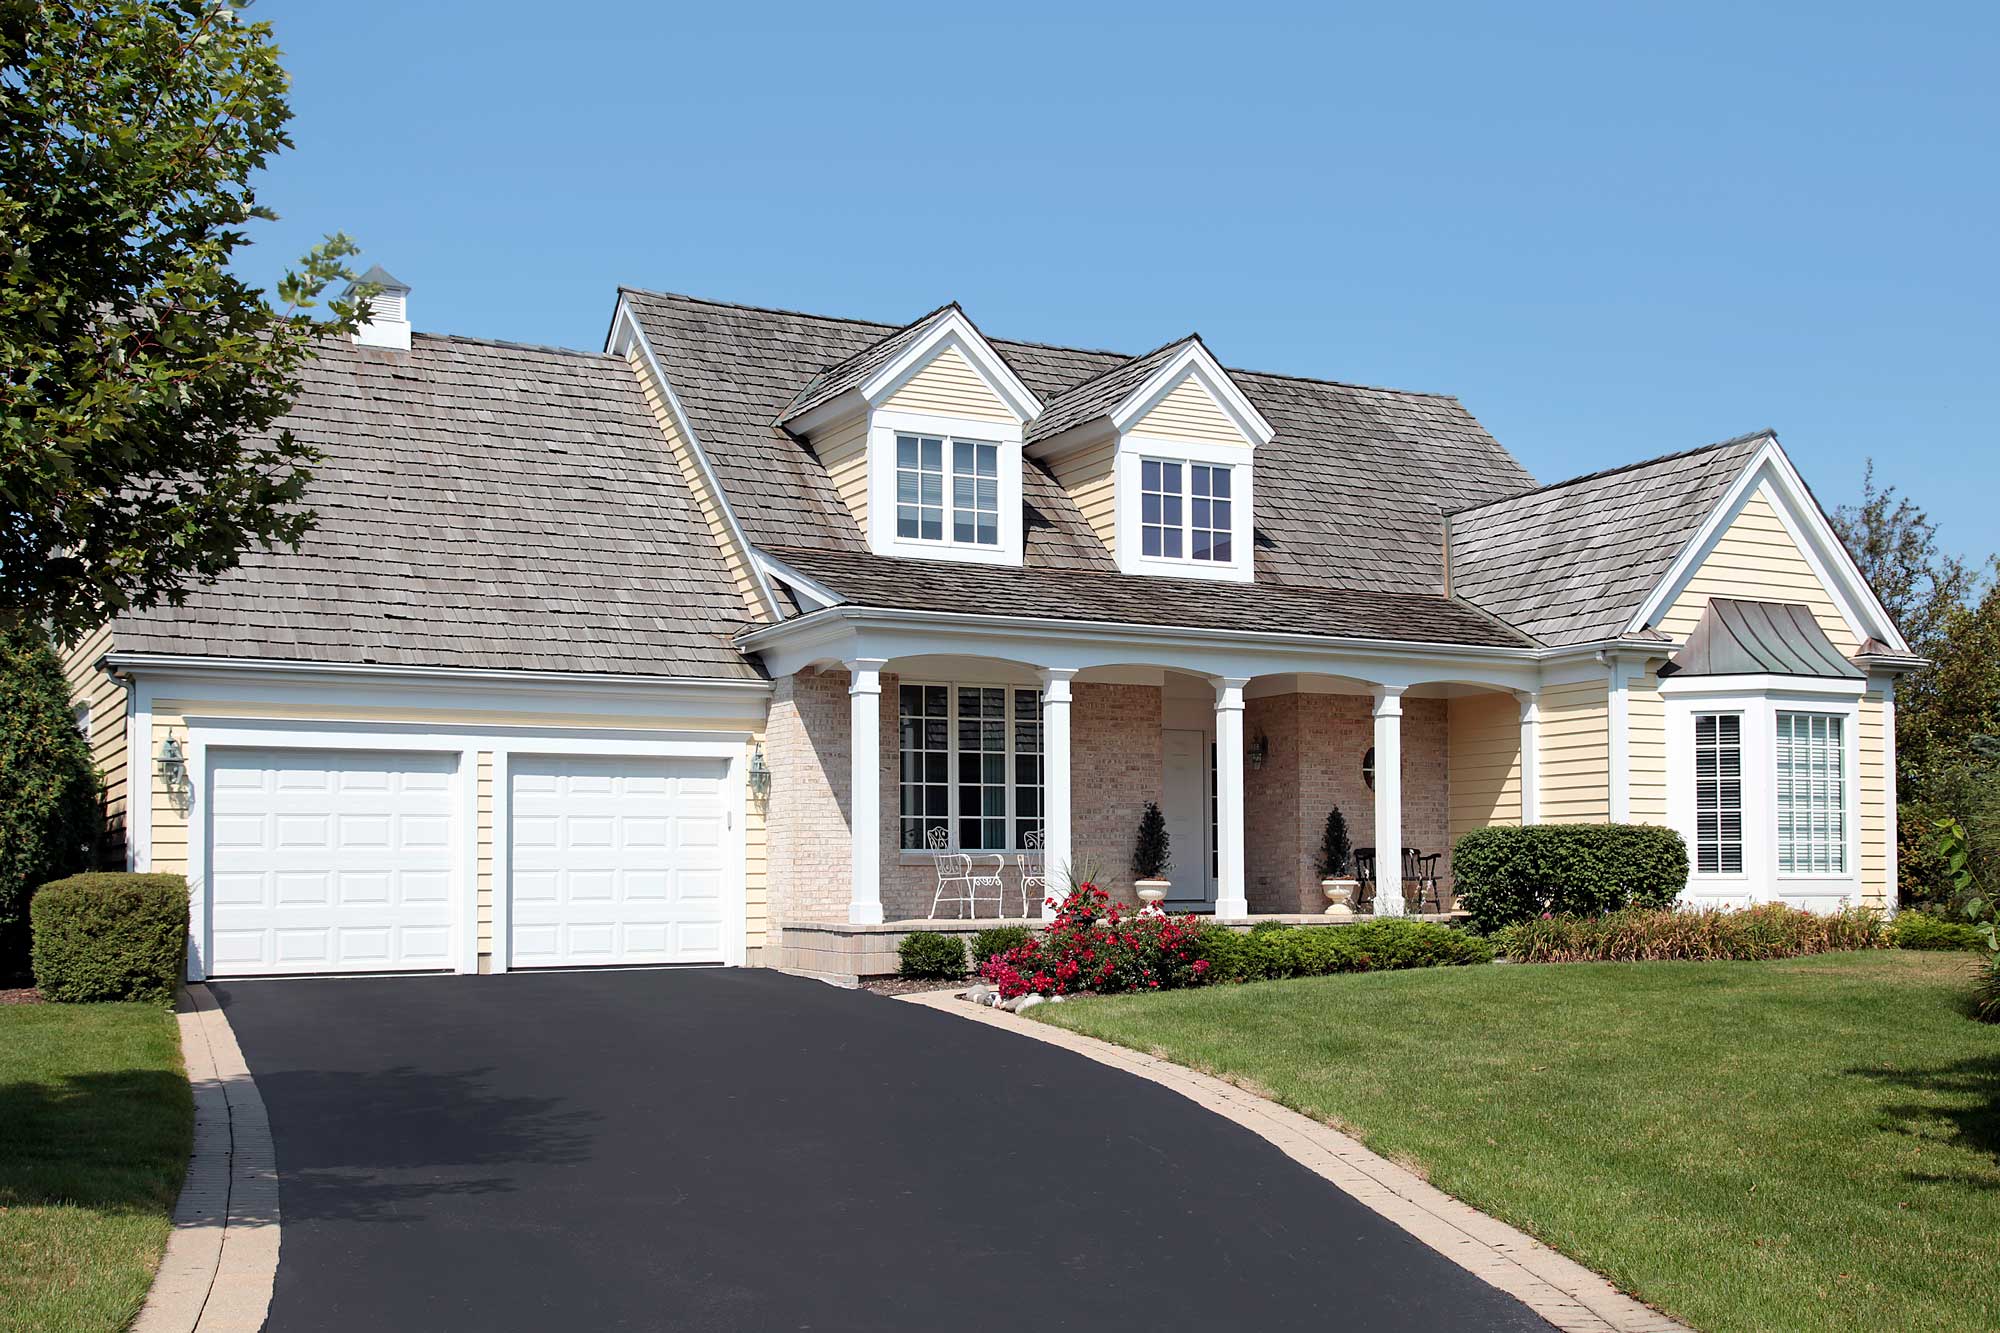 Trusted Local Roofing Contractor in West Linn